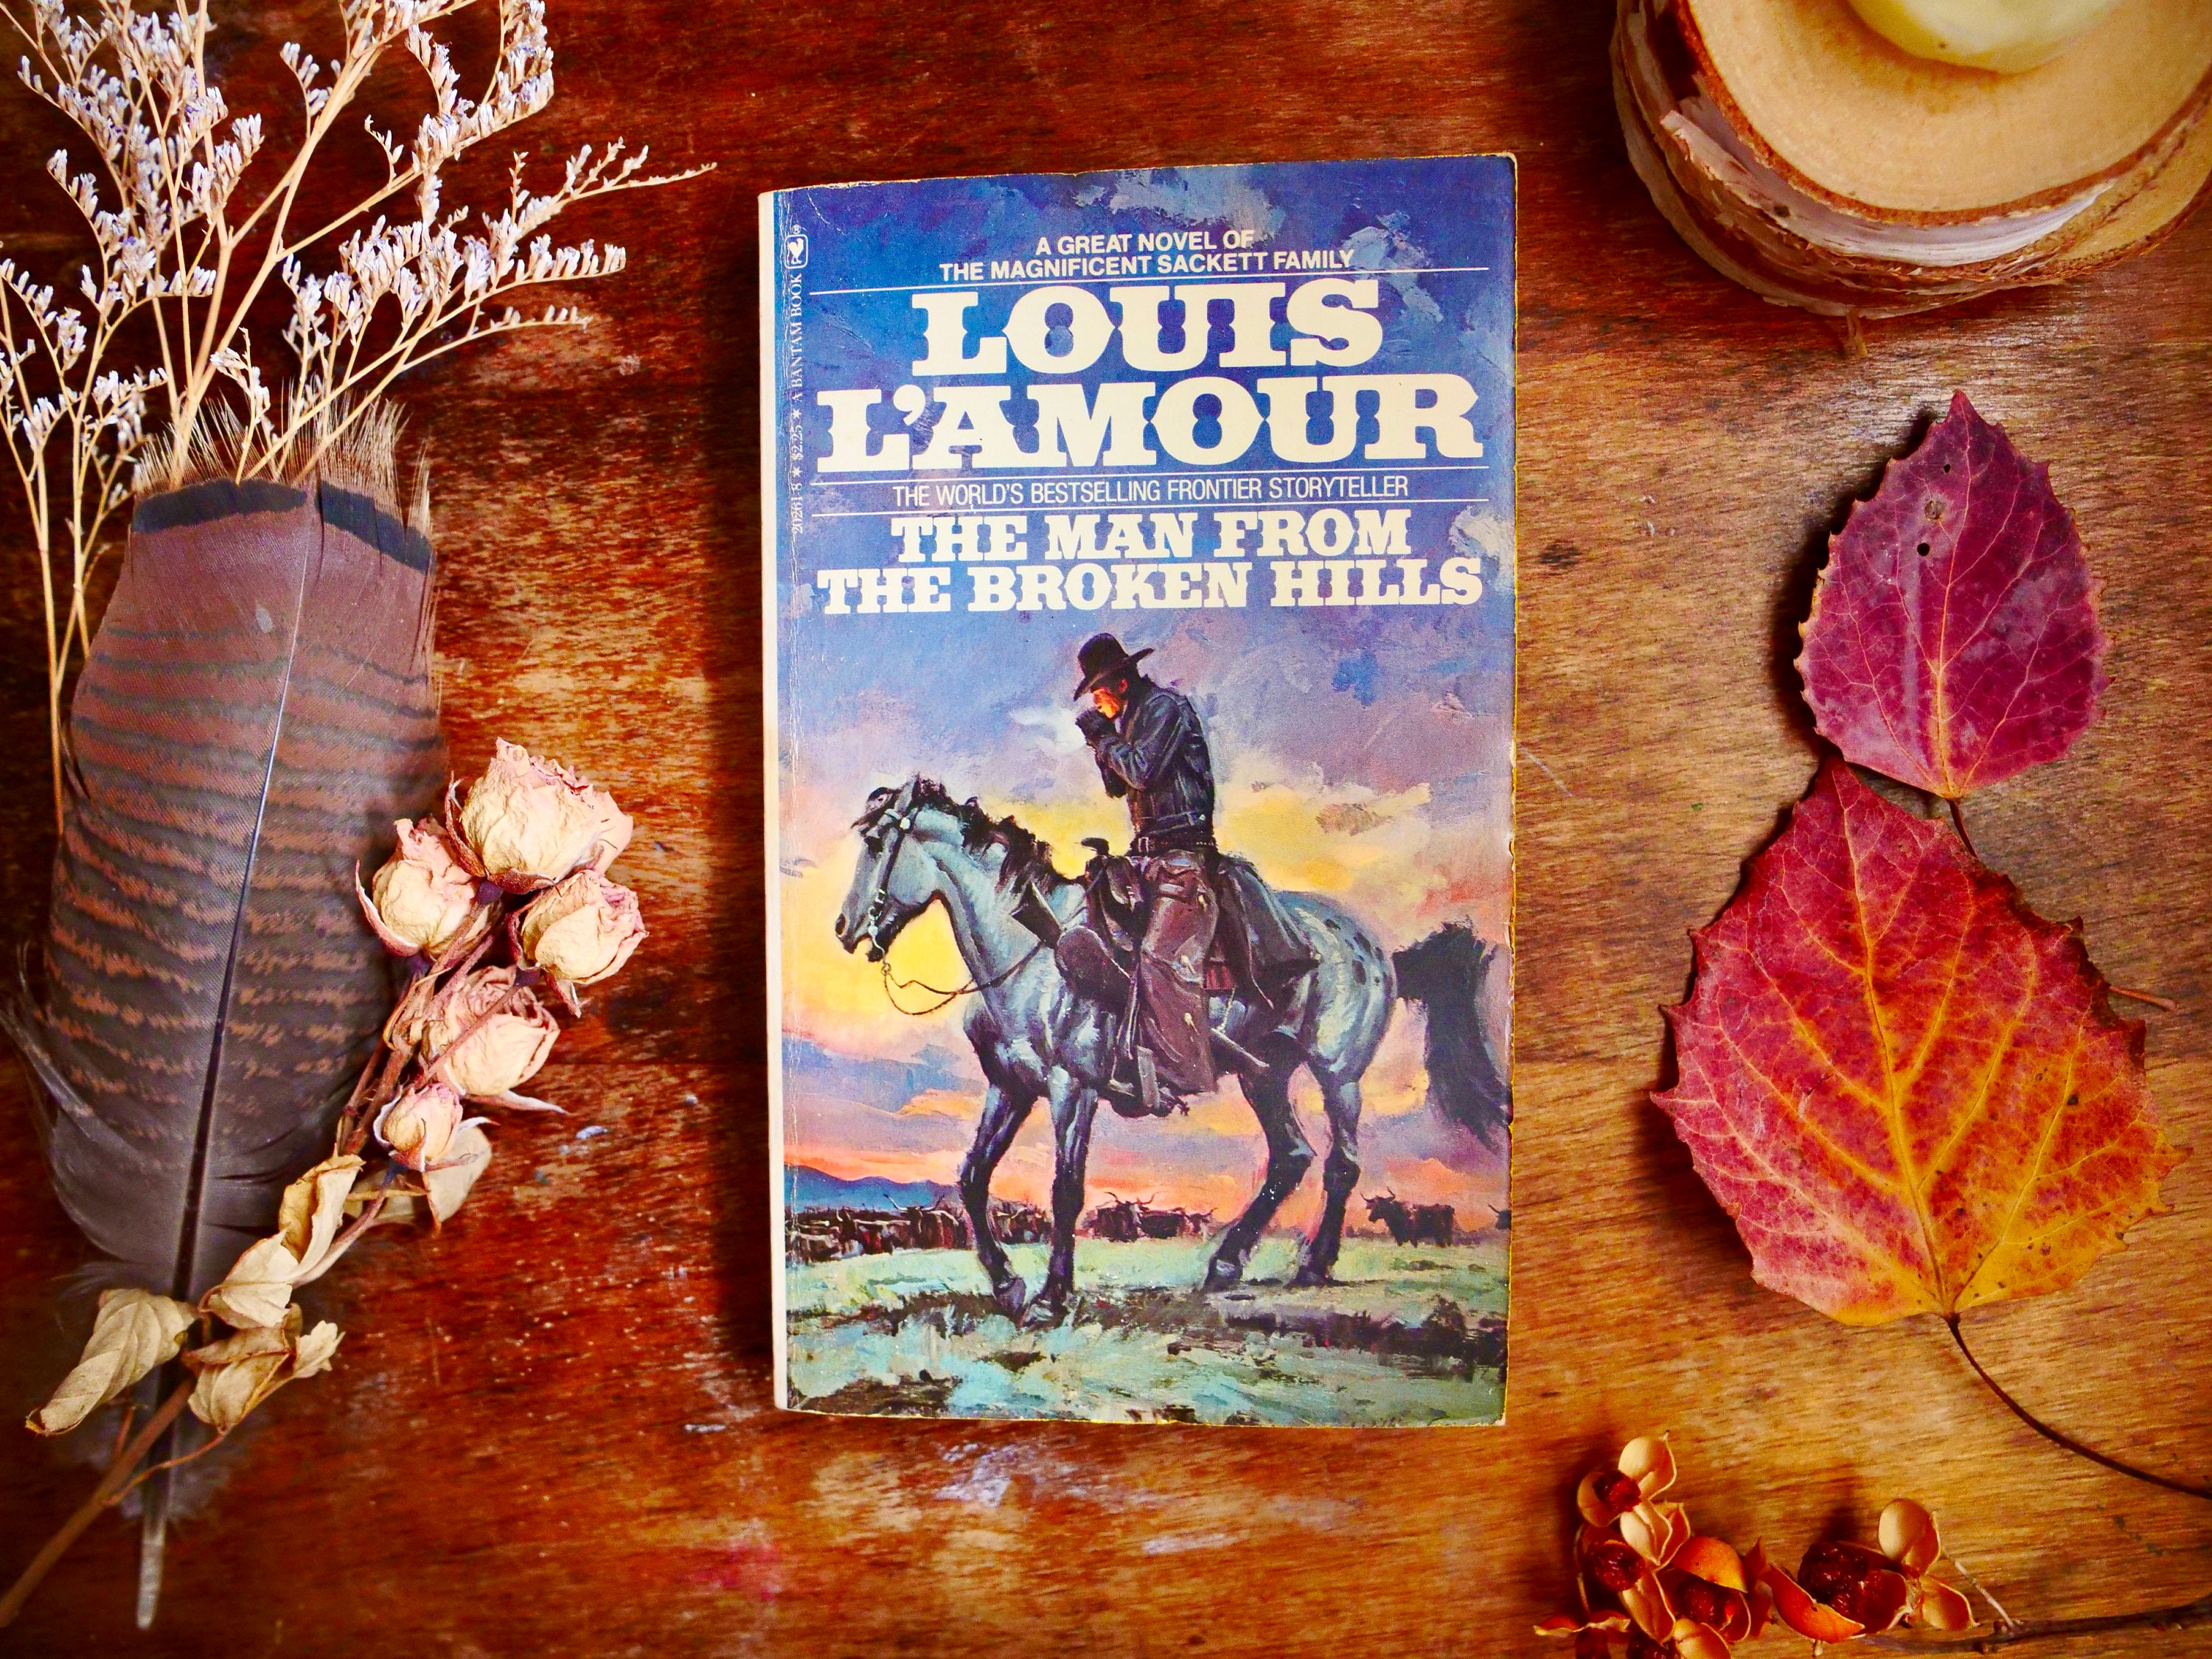 Lot 4 - Louis L'Amour Books - Complete Collection - Sac Valley